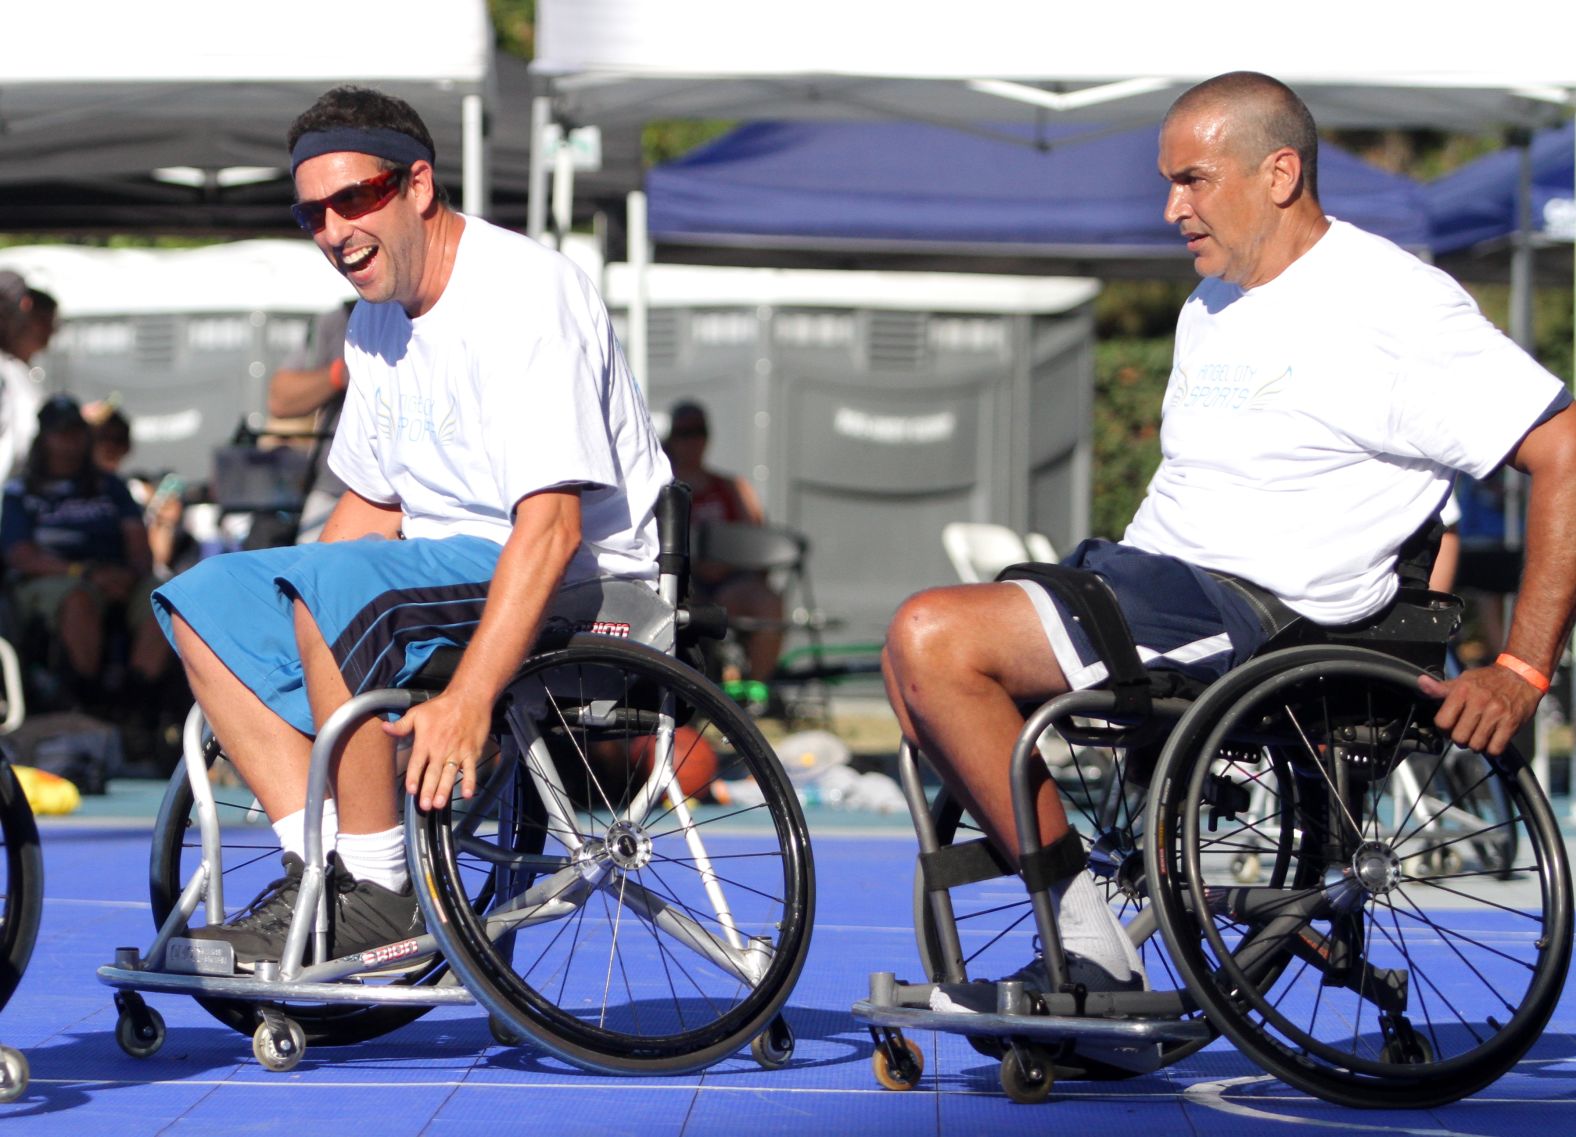 Sandler plays in a celebrity wheelchair basketball game during the Angel City Games in 2016.